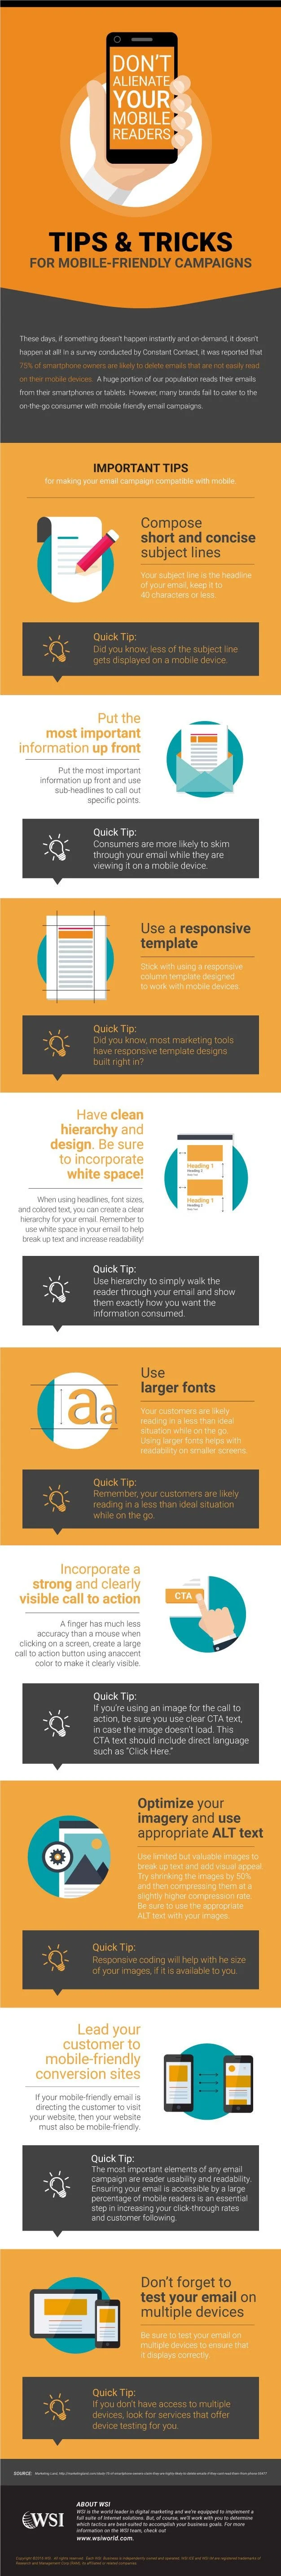 Don’t Alienate Your Mobile Readers - #infographic